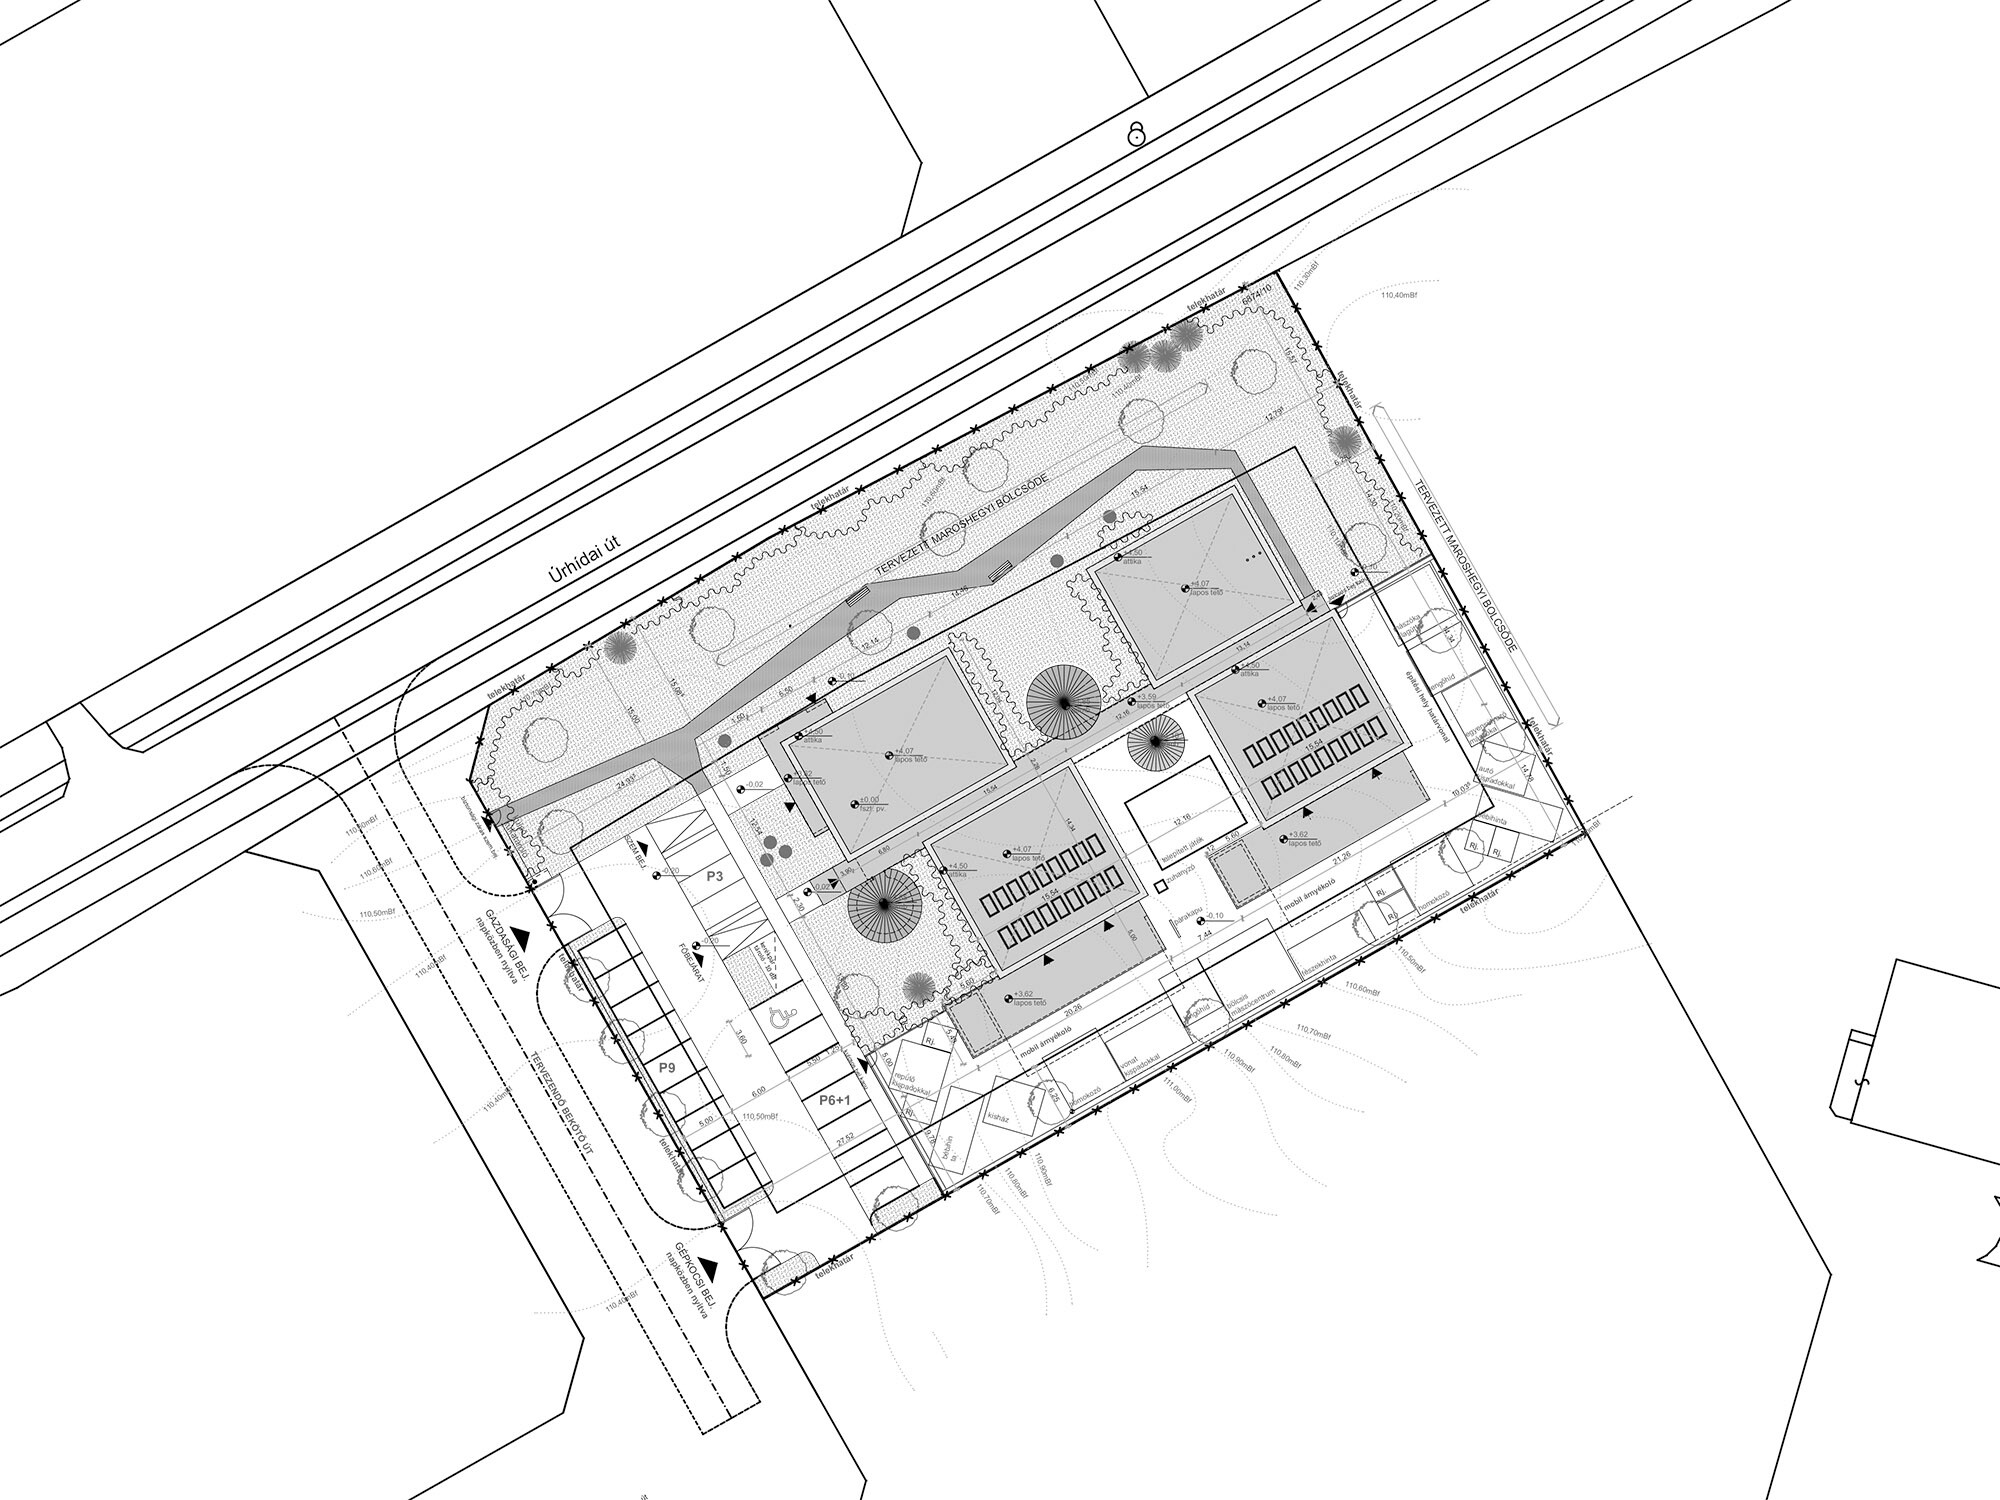 Site plan of the building.